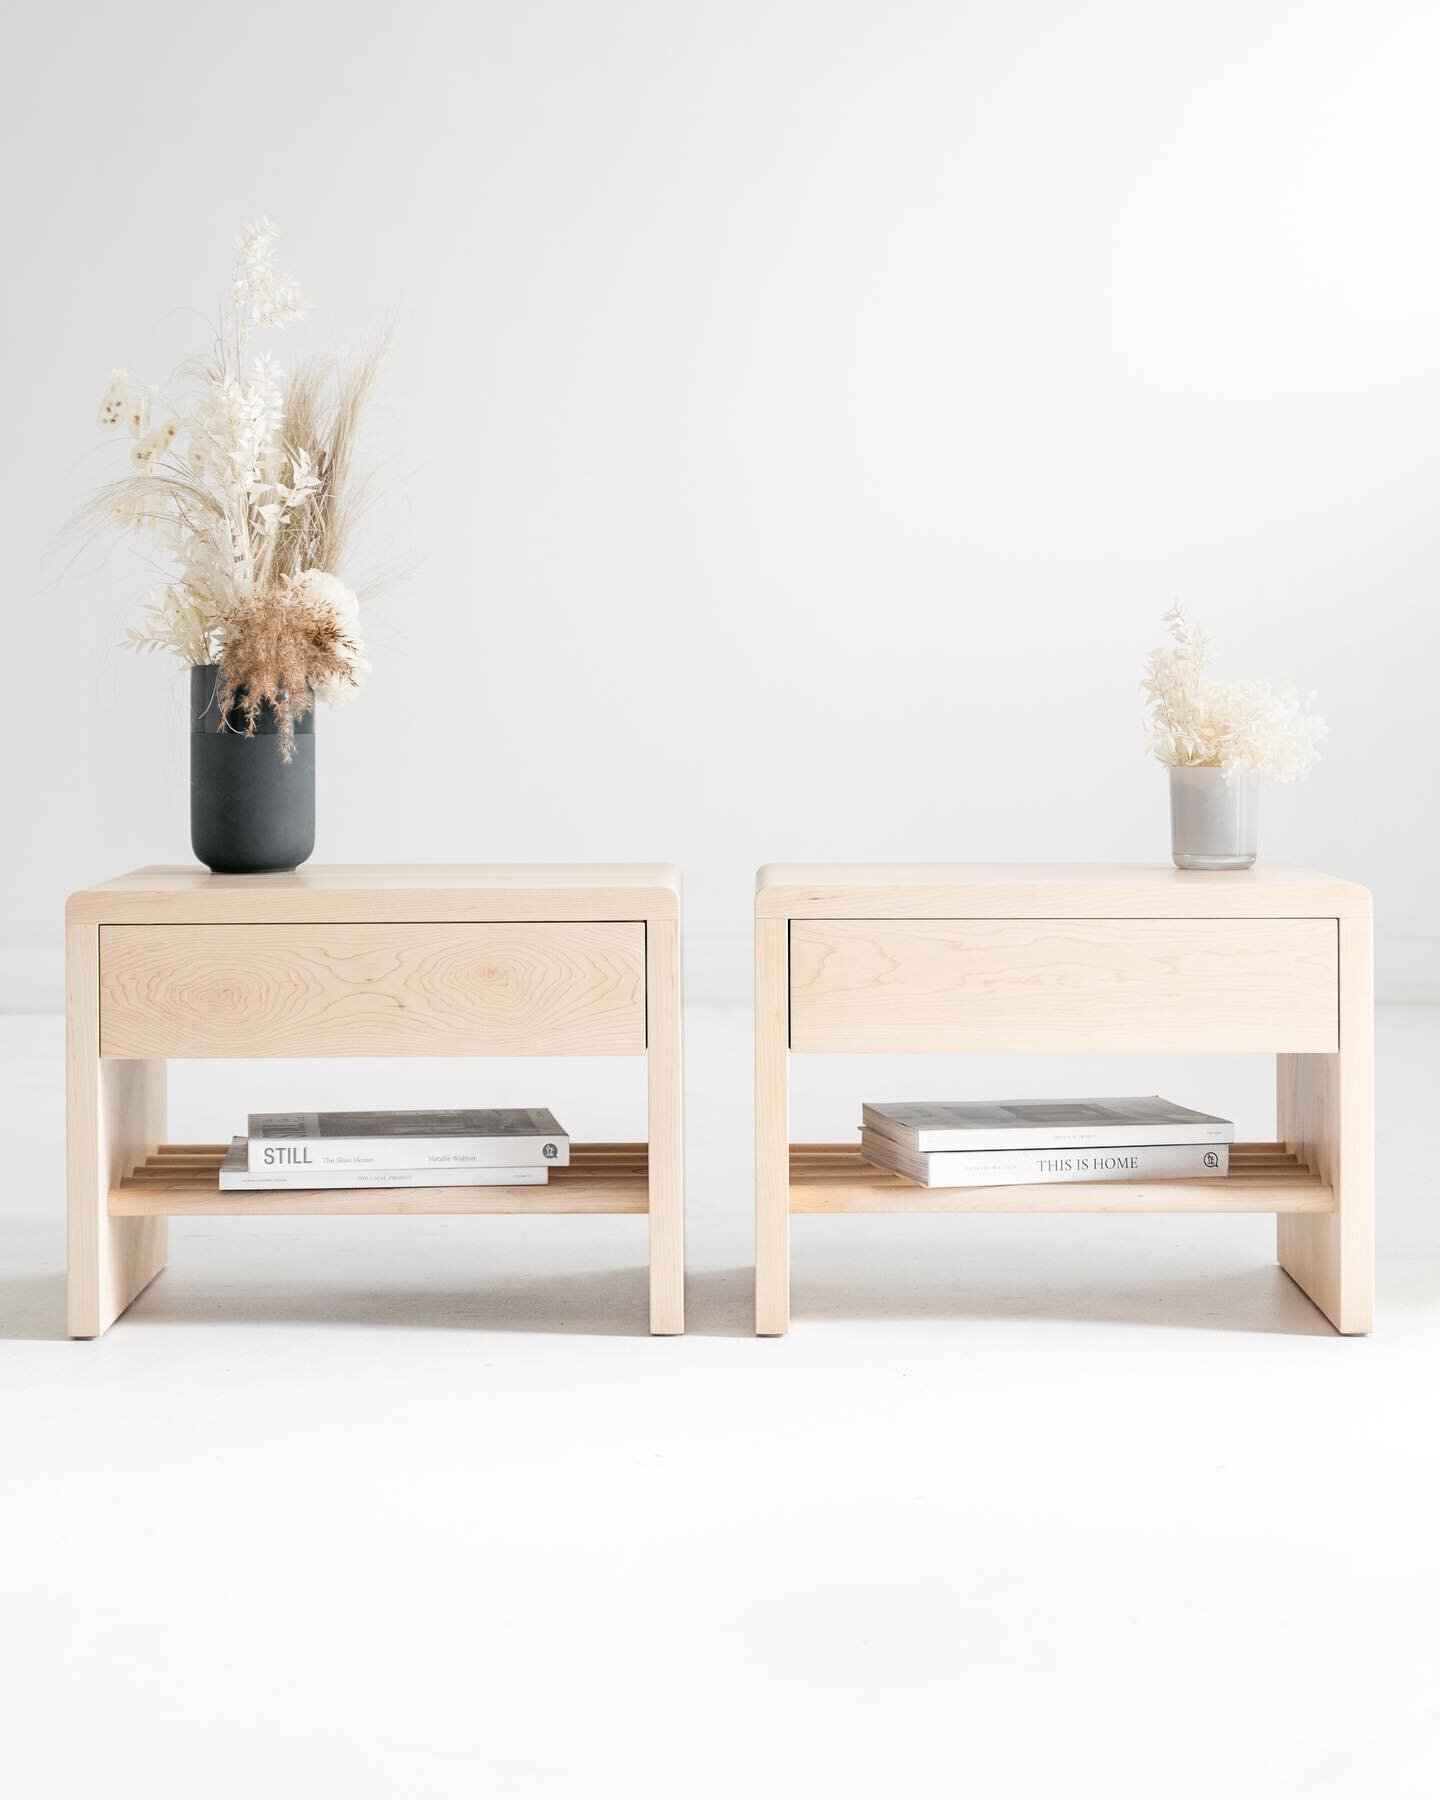 Available - Our first Sova Bedside Tables in American Maple... Made for our shoot, now ready for a new home - DM if interested
&bull;
&bull;
&bull;
&bull;
&bull;
&bull;
&bull;
&bull;
&bull;
&bull;
&bull;
&bull;
&bull;
&bull;
&bull;
&bull;
&bull;
&bul